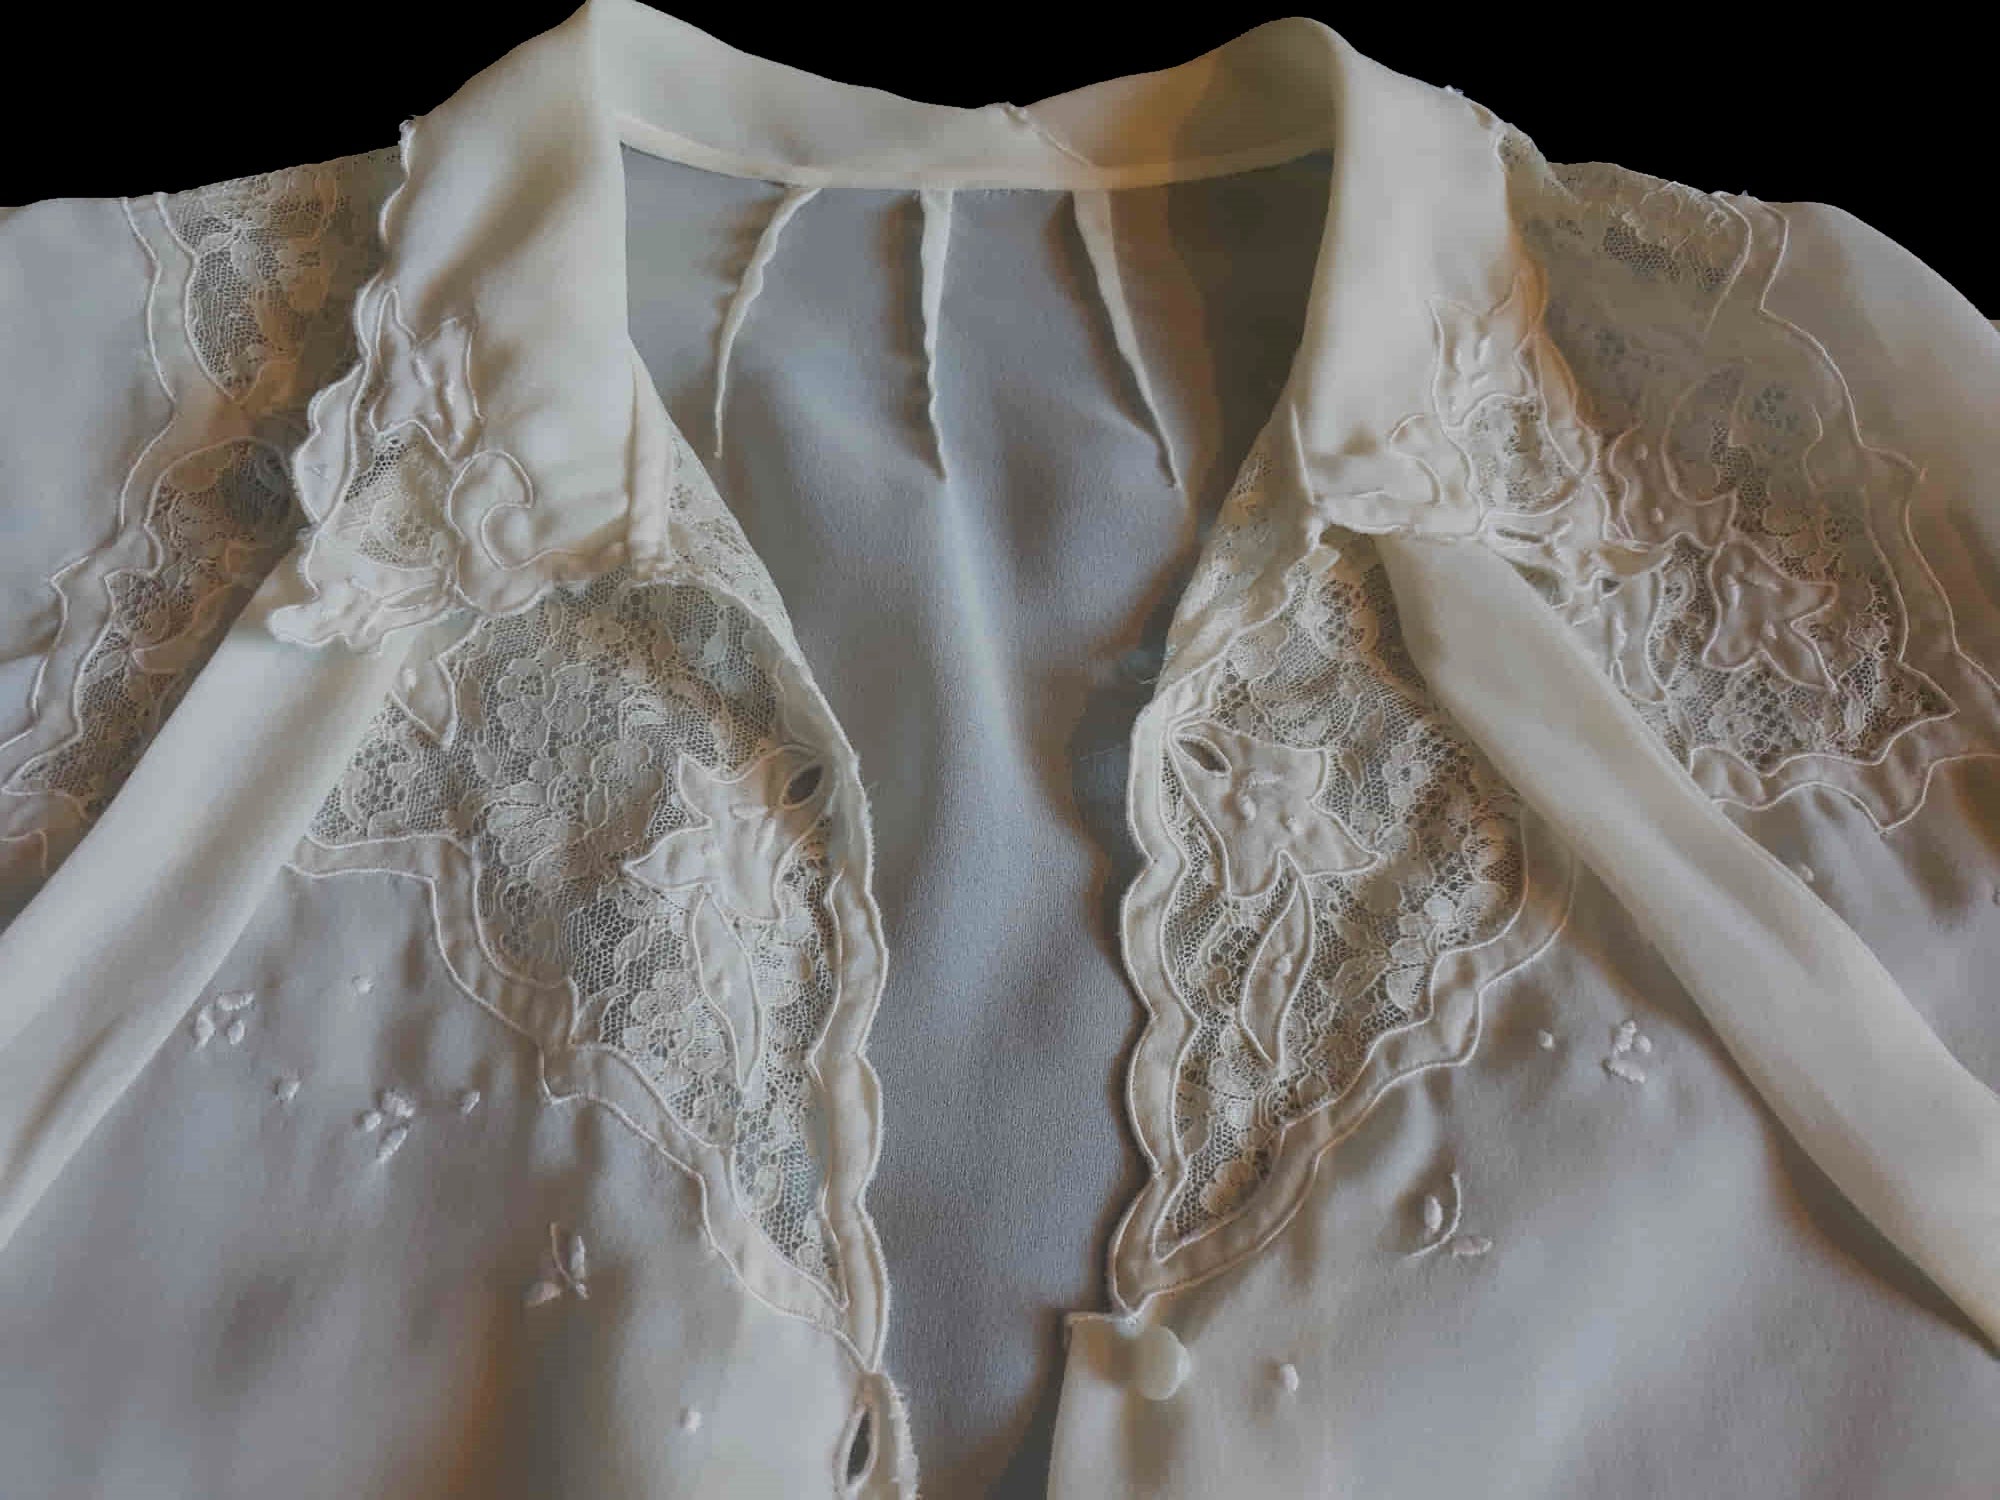 1940s vintage ivory silk georgette blouse with lace insertion and applique medium